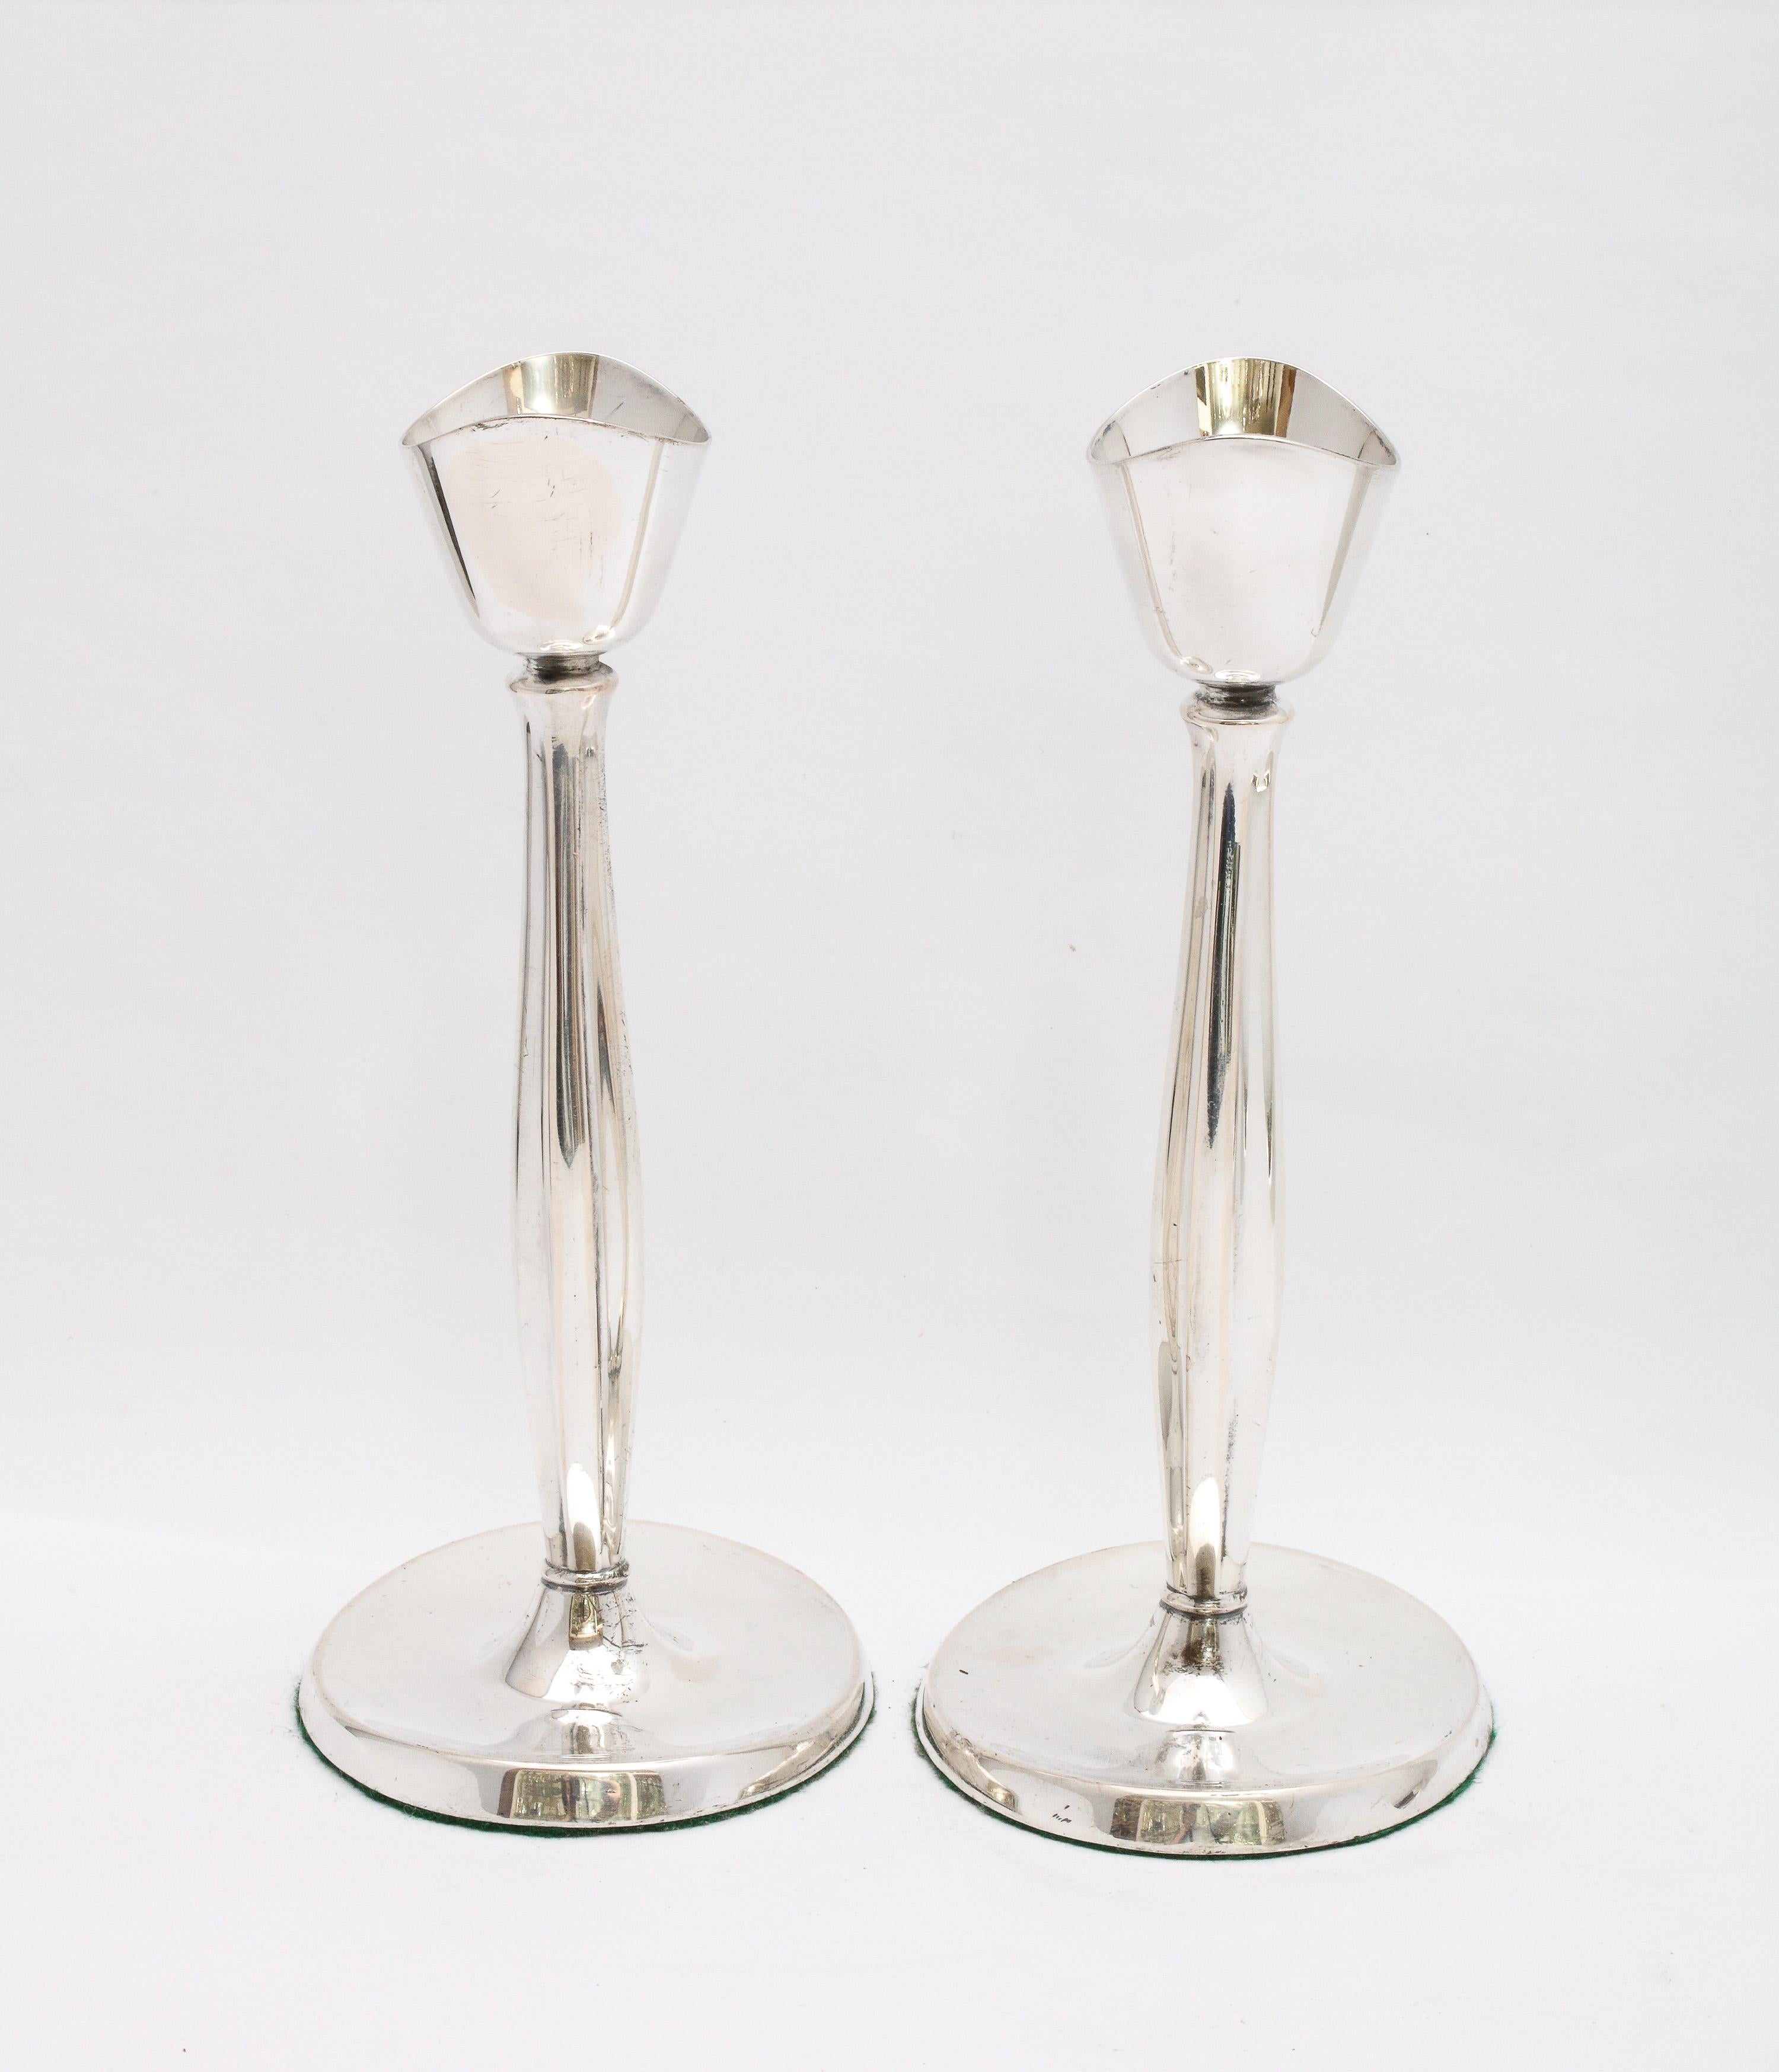 Pair of Mid-Century Modern Danish Sterling Silver Candlesticks by Cohr For Sale 4